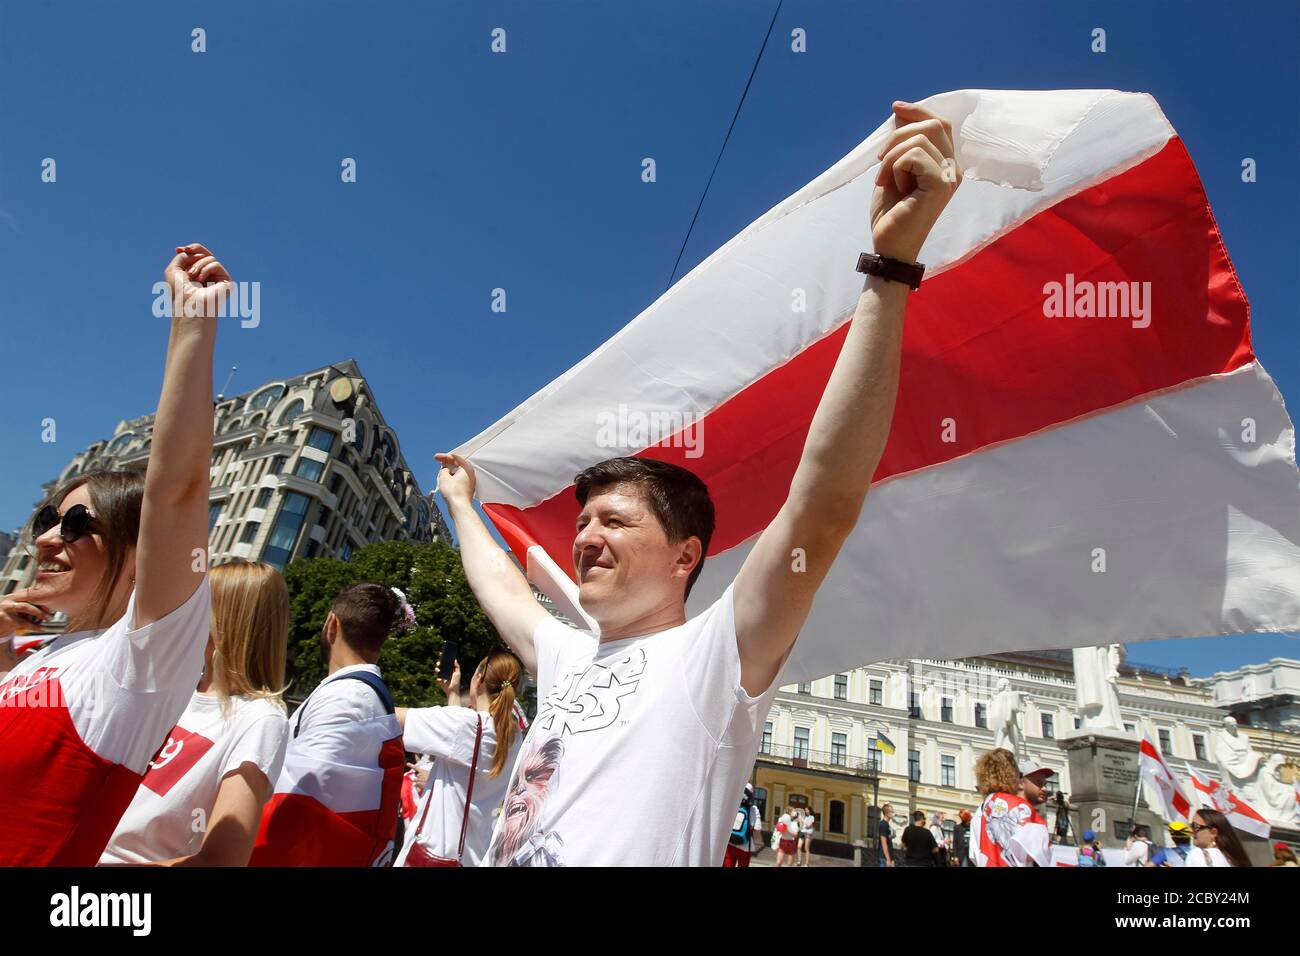 A protester holding the historic Belarusian flag during the demonstration.Belarusian citizens living in Ukraine and activists took part in a rally called 'March for Free Belarus' protesting against rigging Belarus presidential election. Stock Photo